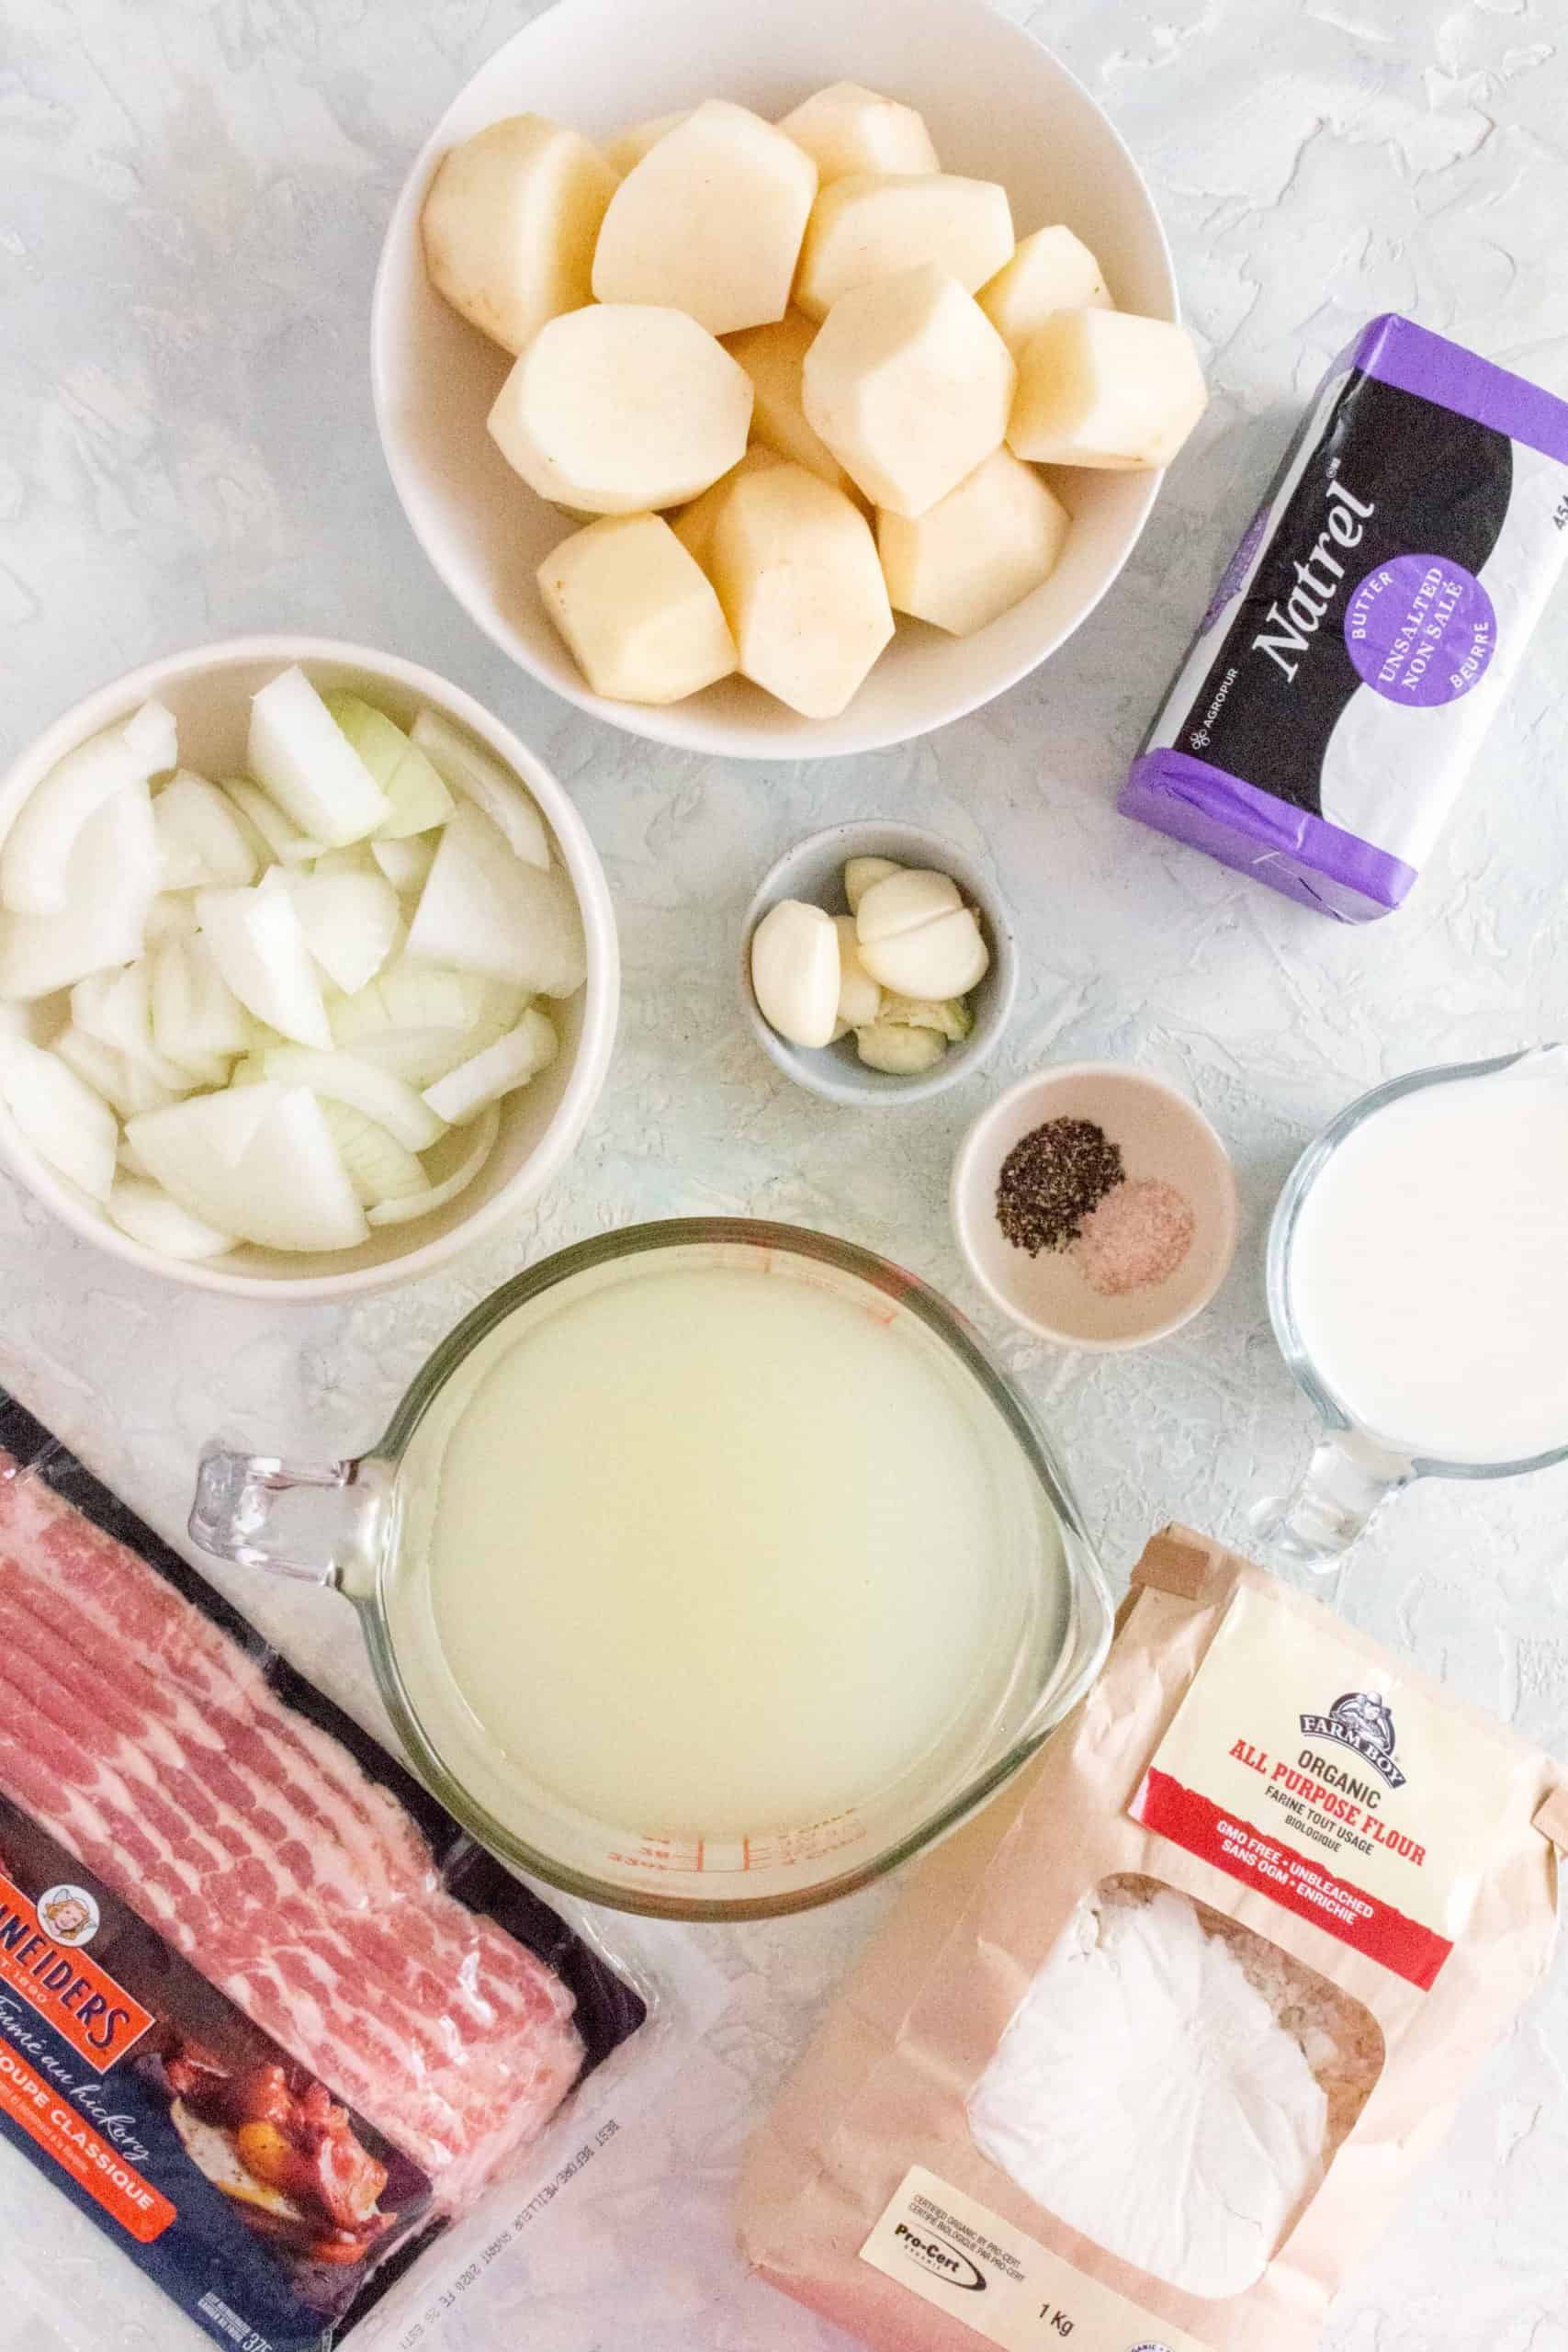 What You Need To Make Potato Soup in the Instant Pot. Ingredients shown: potato, garlic, onion, bacon, stock, flour, butter, milk, salt, pepper